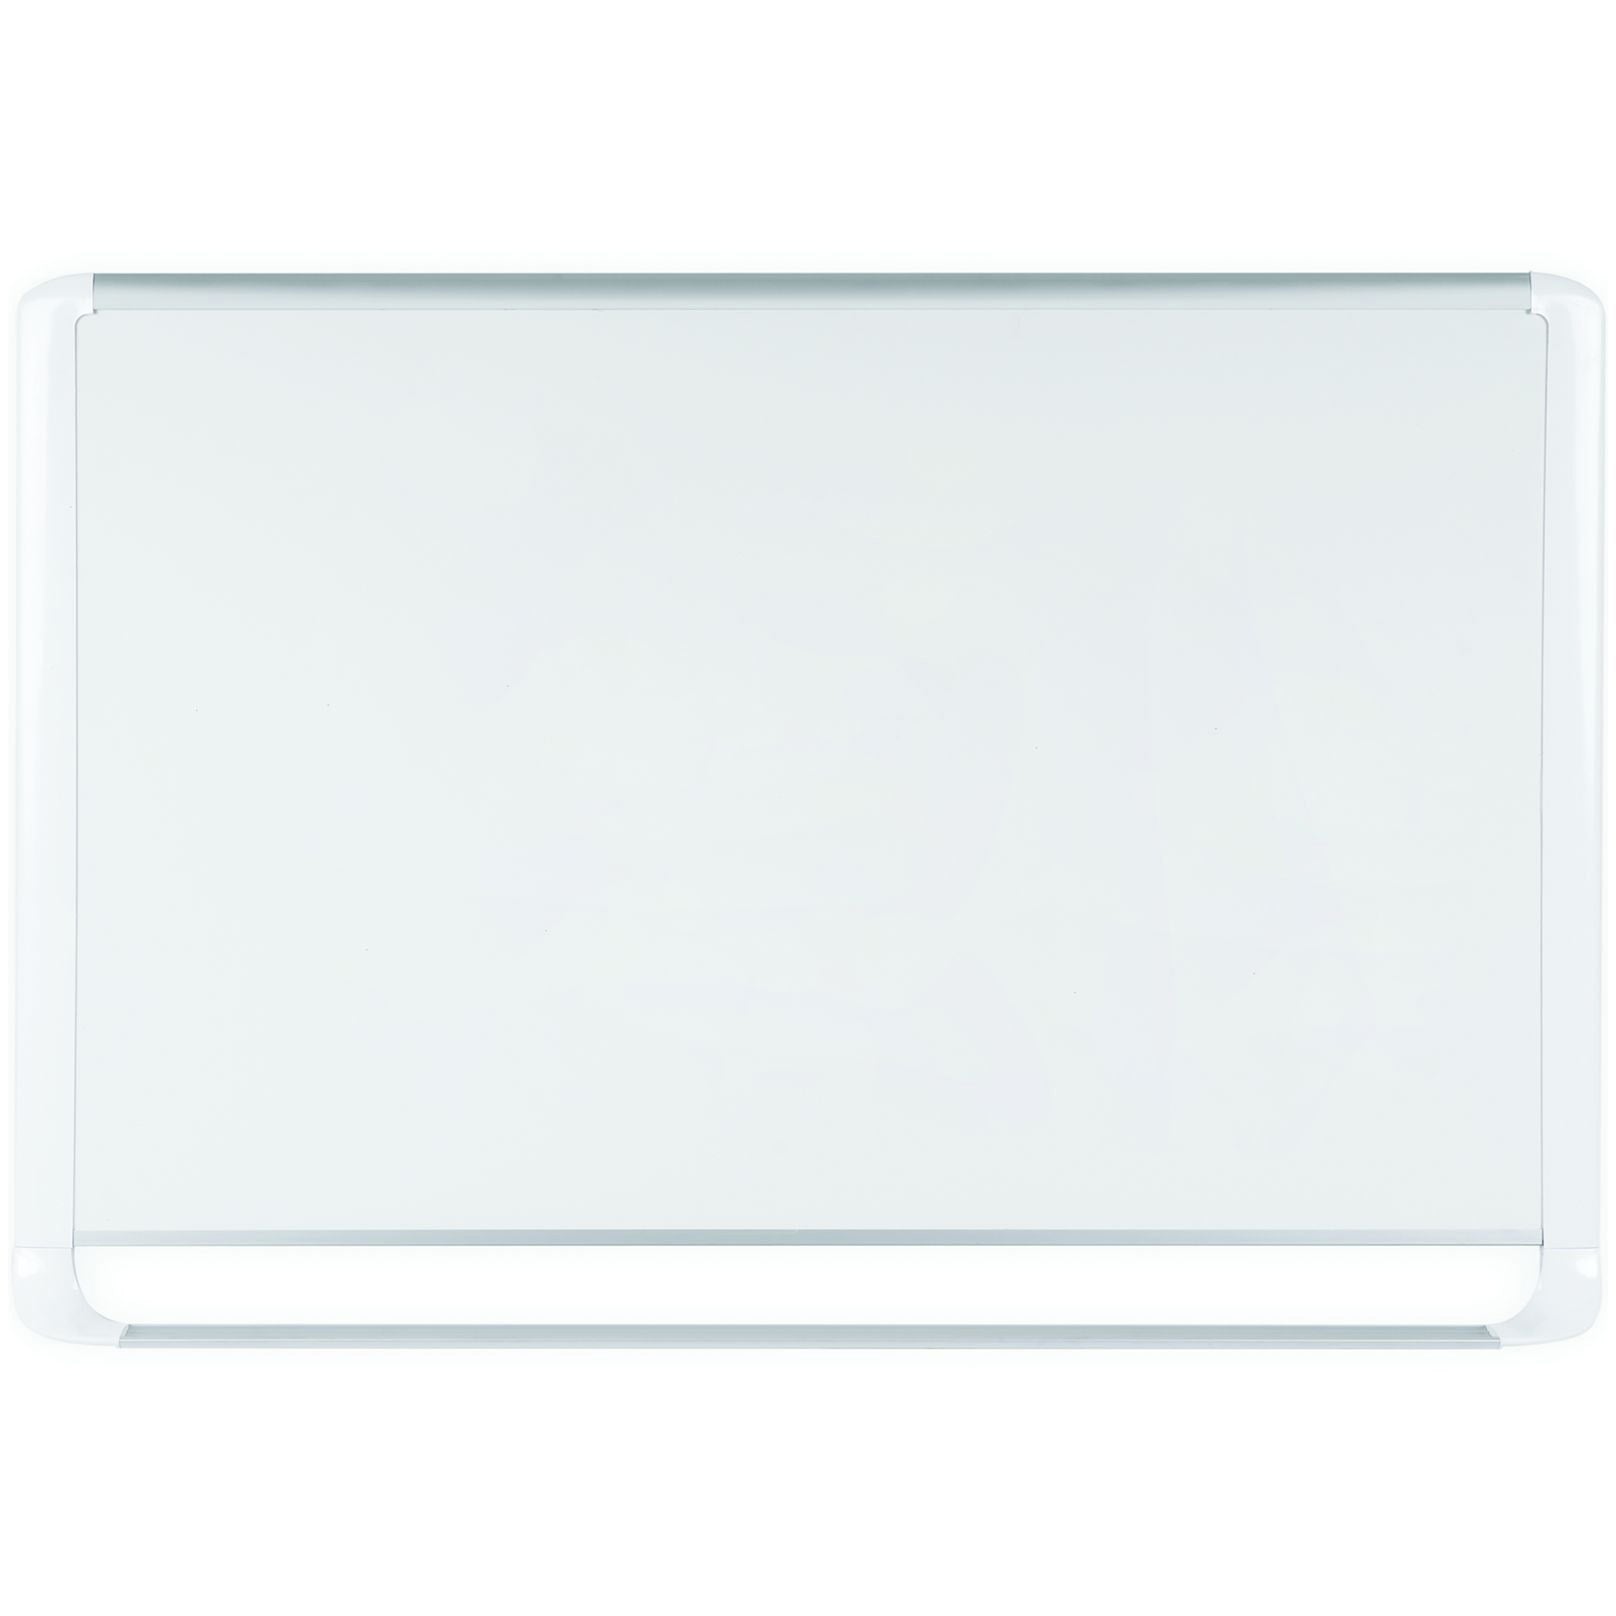 MVI030205 MVI Series Magnetic Laquered Steel Dry Erase Board, Easy Clean, Scratch Resistant Wall Mounting Whiteboard, 24" x 36", White Frame by MasterVision